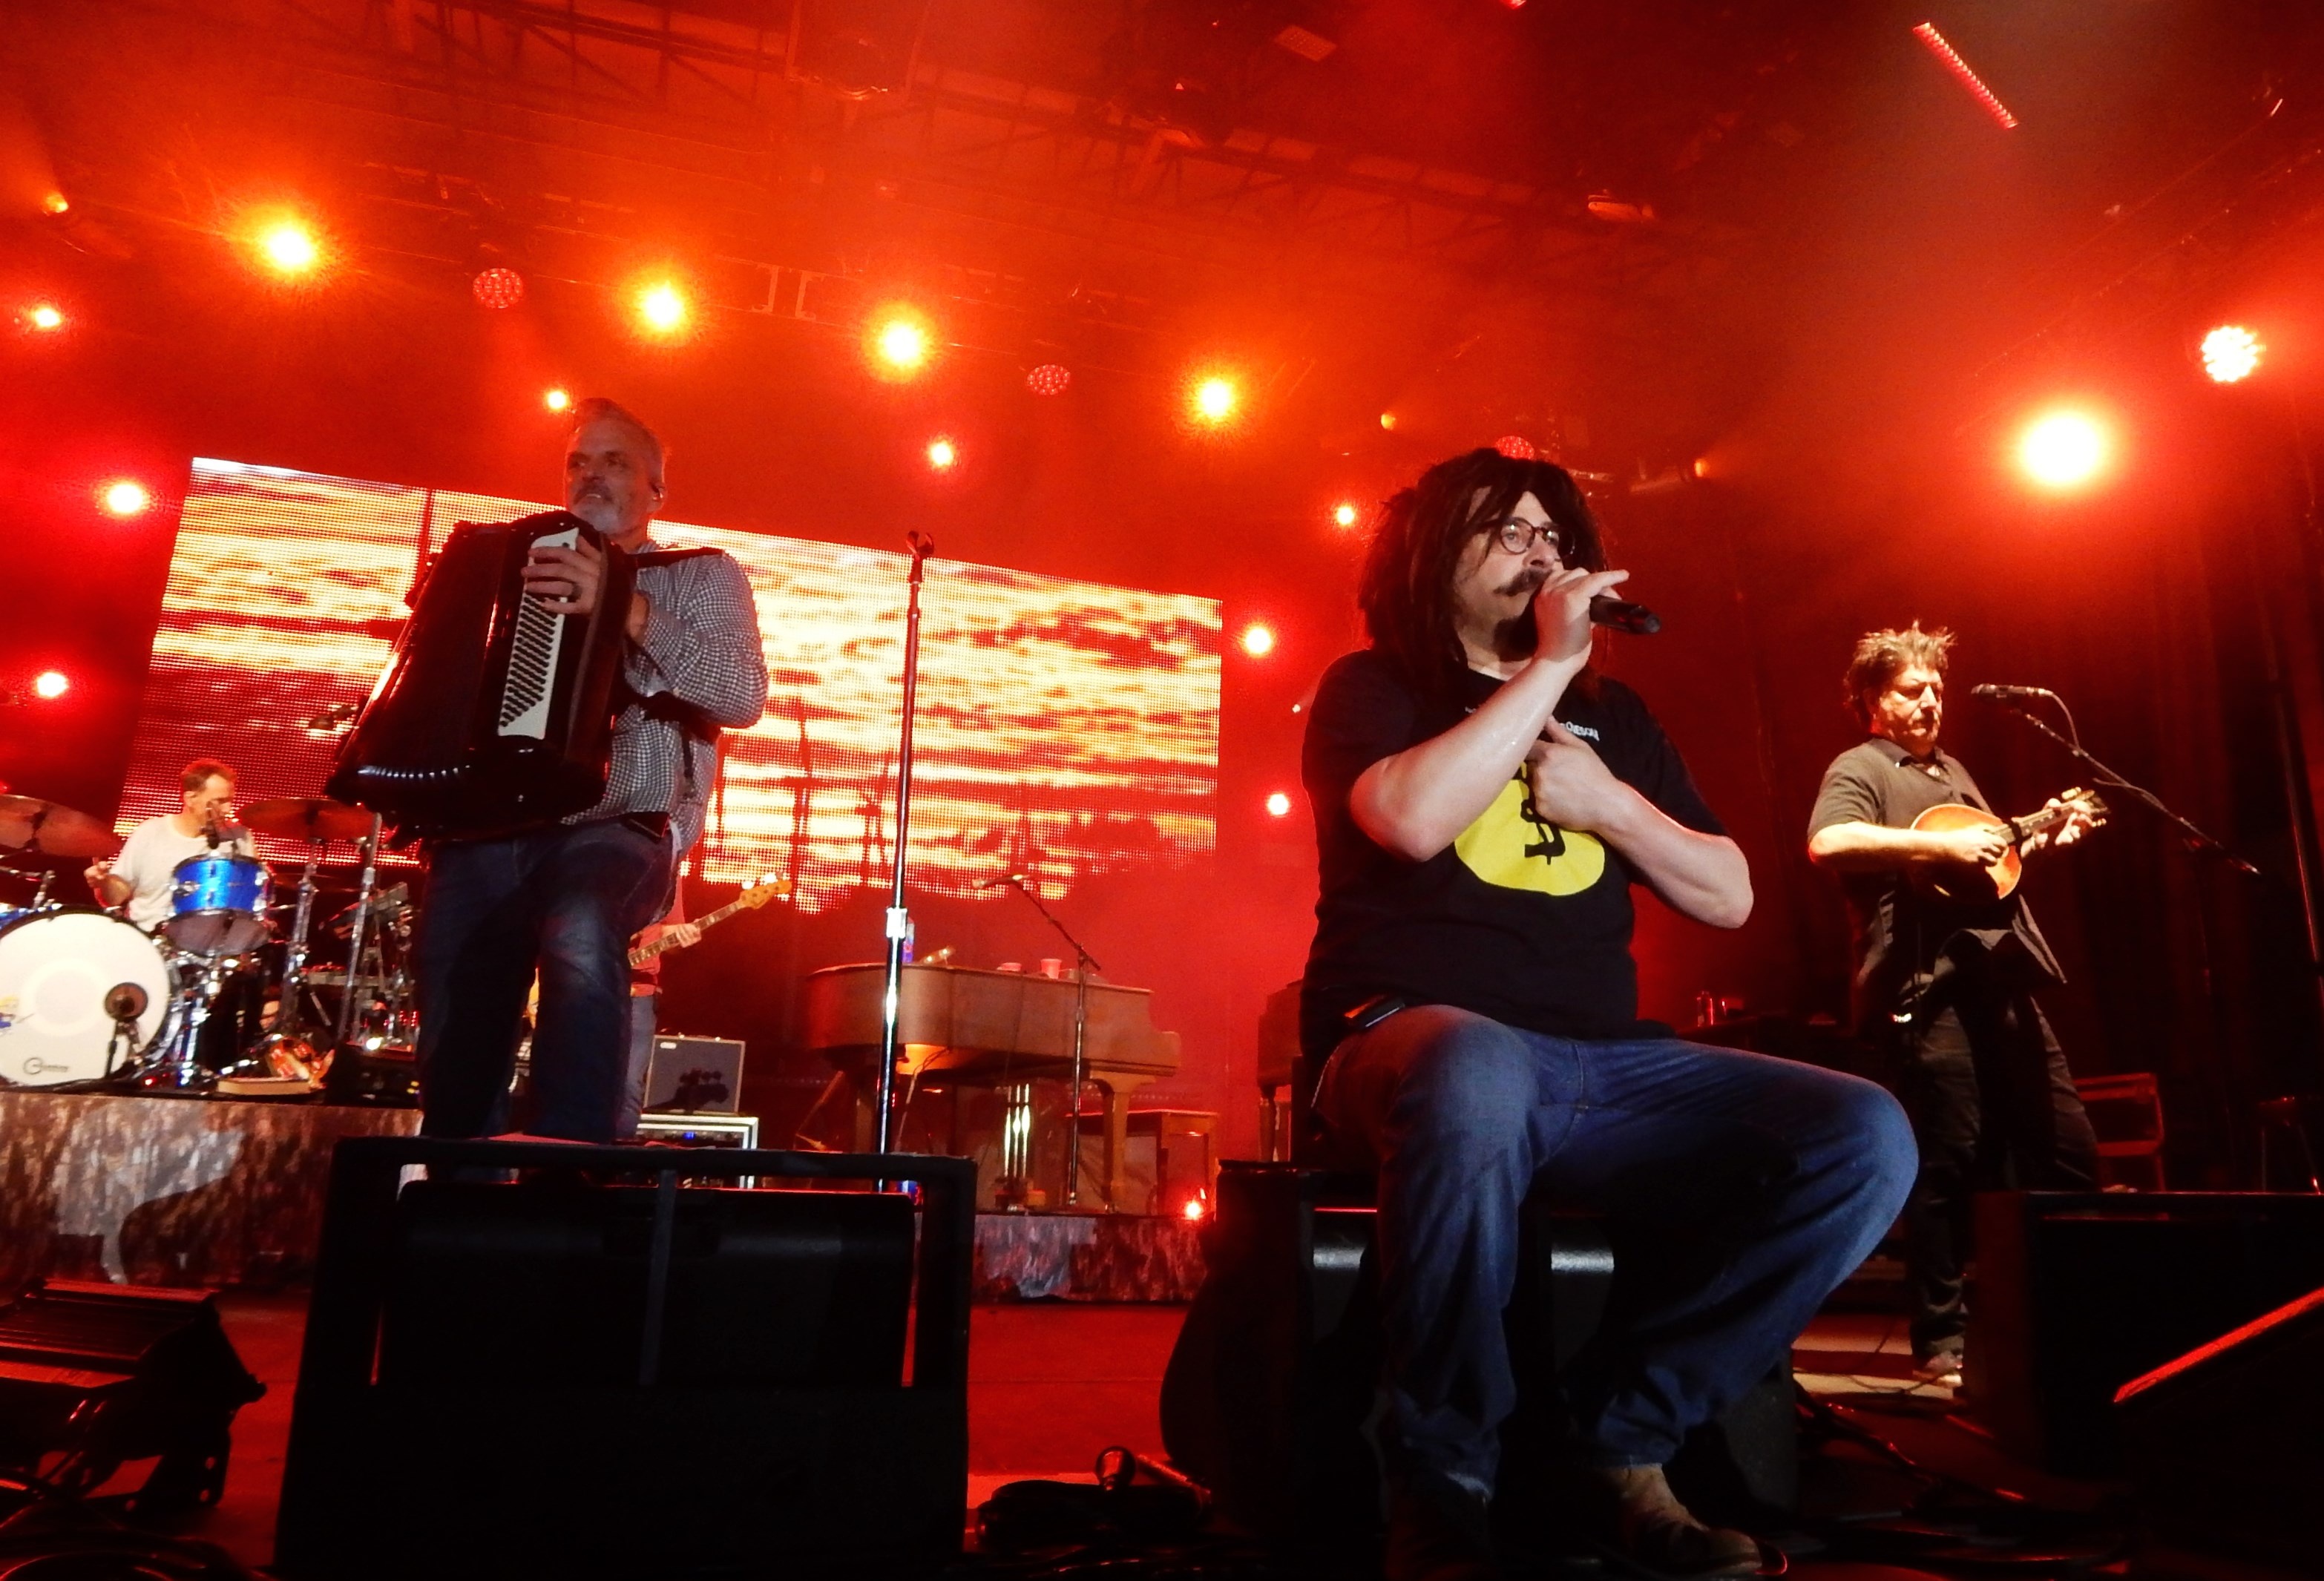 Charlie Gillingham, Concert review, Counting Crows, Night of nostalgia, 3140x2140 HD Desktop